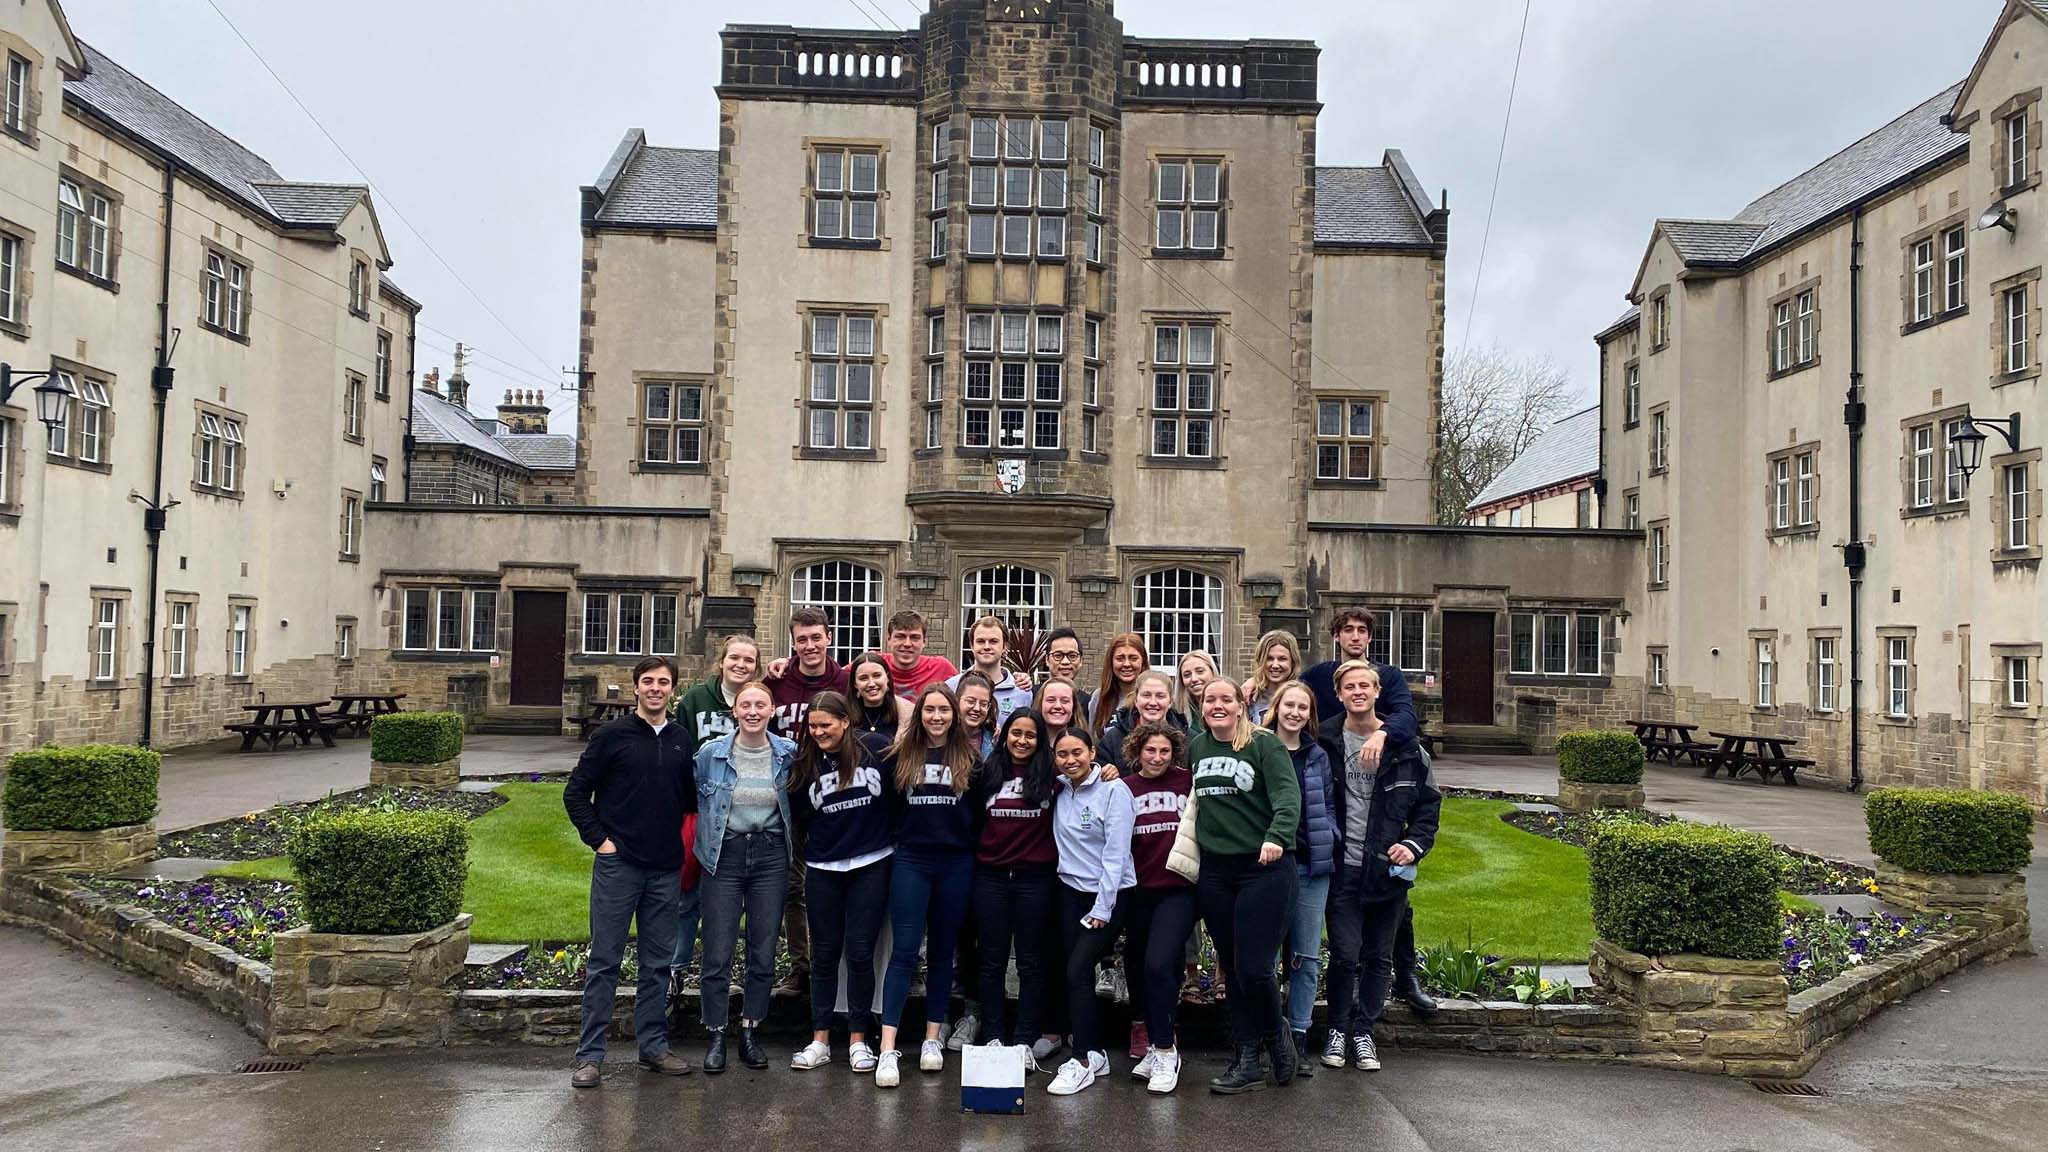 Large group of students gathered in front of European style building in Devonshire